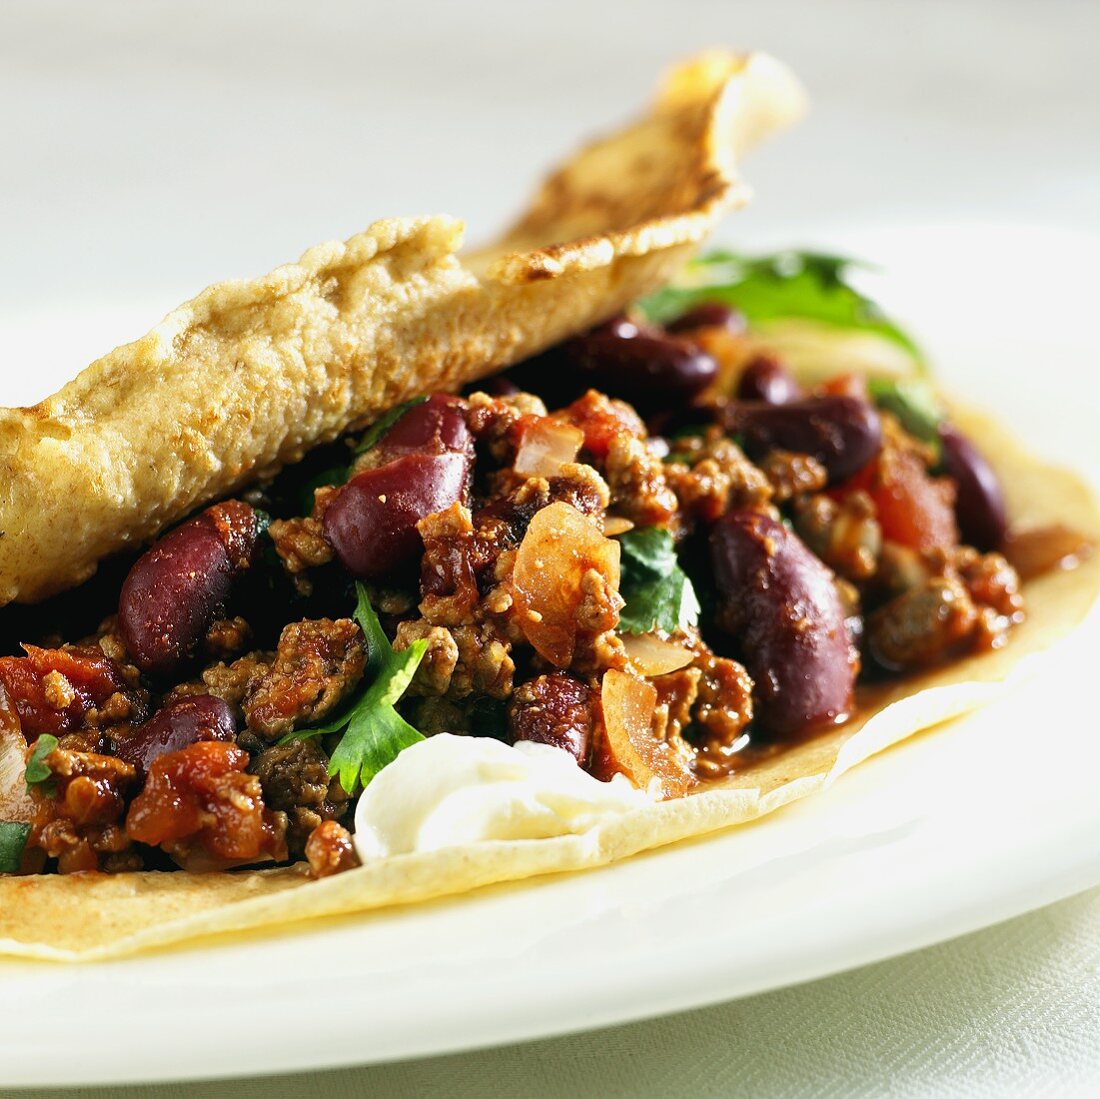 Pancake filled with chili con carne